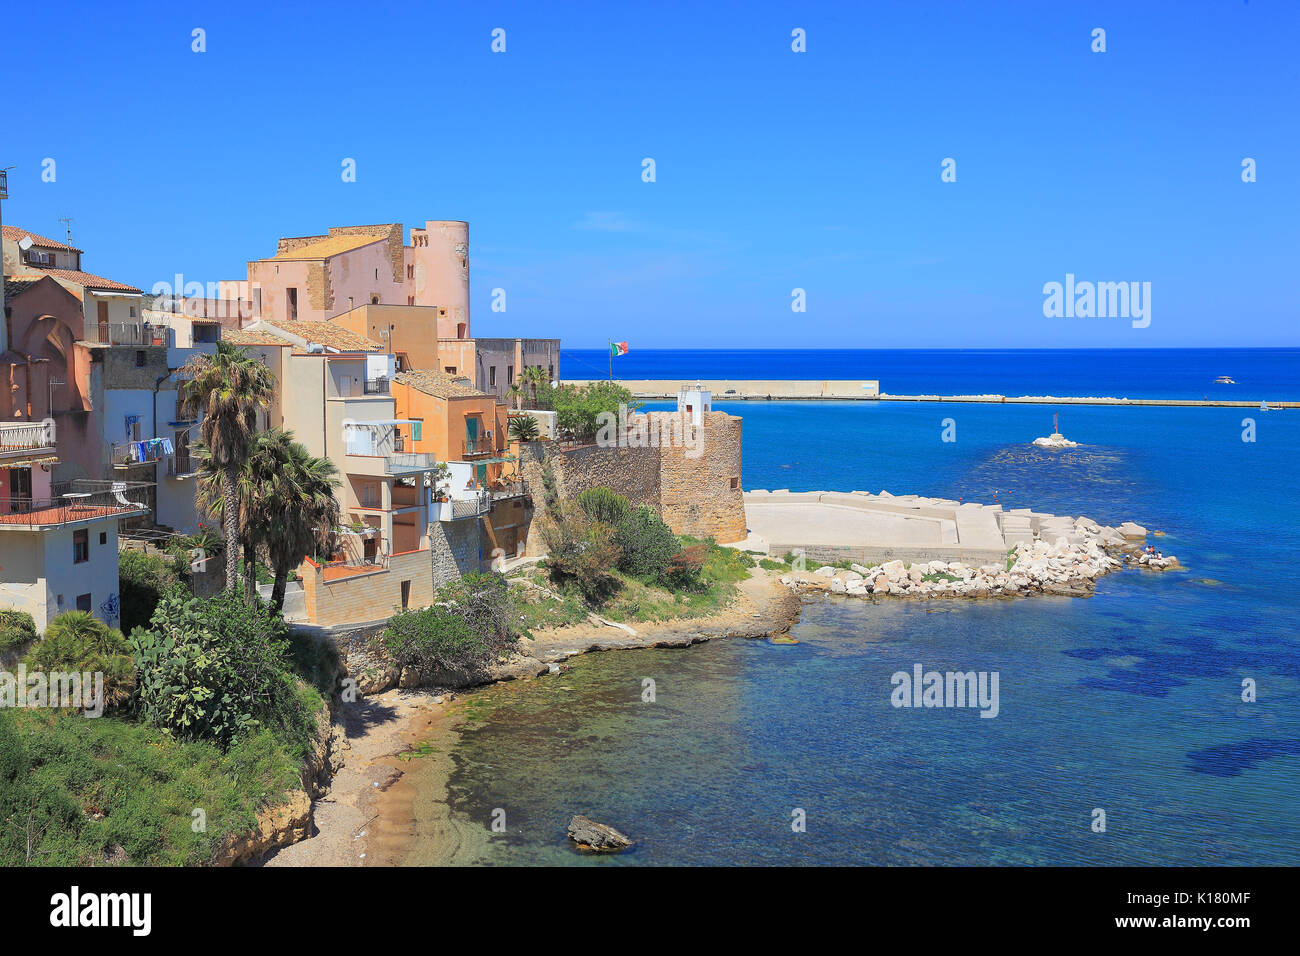 Sicily, Castellammare del Golfo, municipality in the province of Trapani, view of the castle from the 14th century by the sea Stock Photo